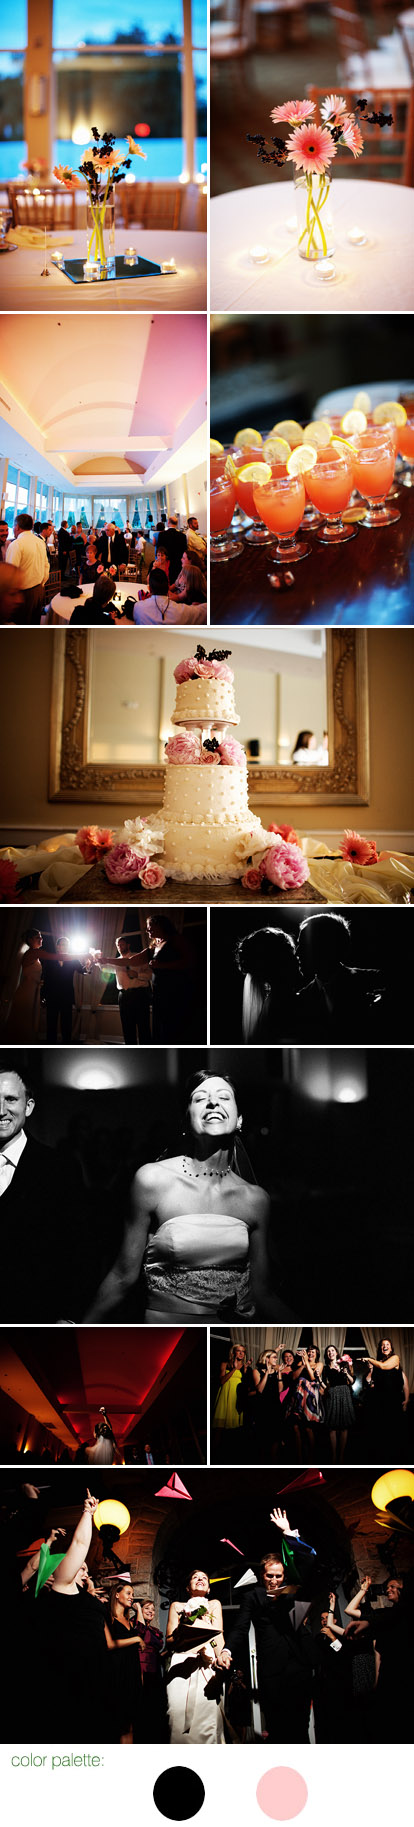 Atlanta, Georgia real wedding reception at The Piedmont Room, pink and black wedding color palette, photography by Poser Image